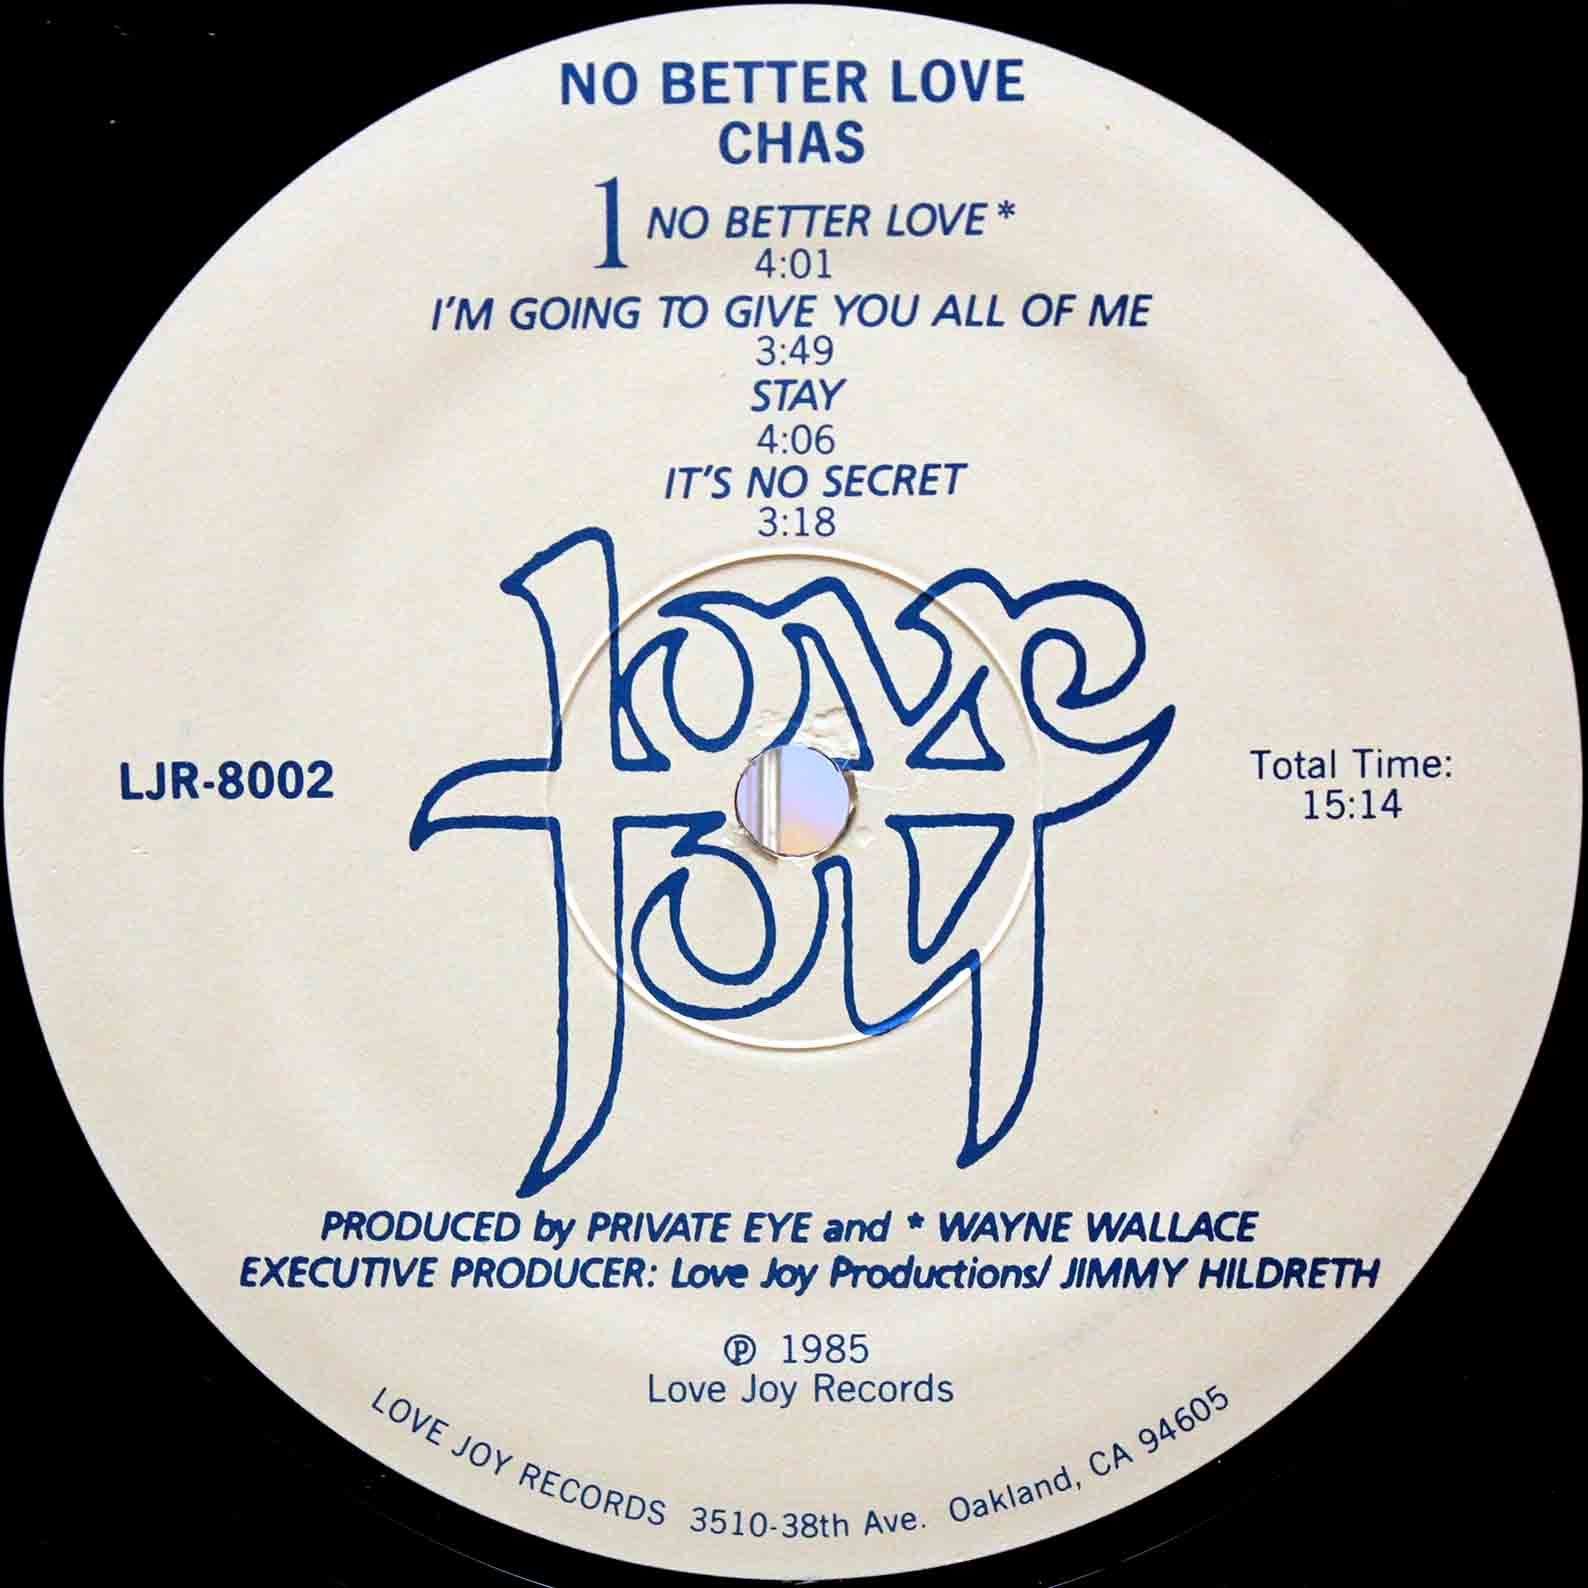 Chas (1985) – No Better Love 03